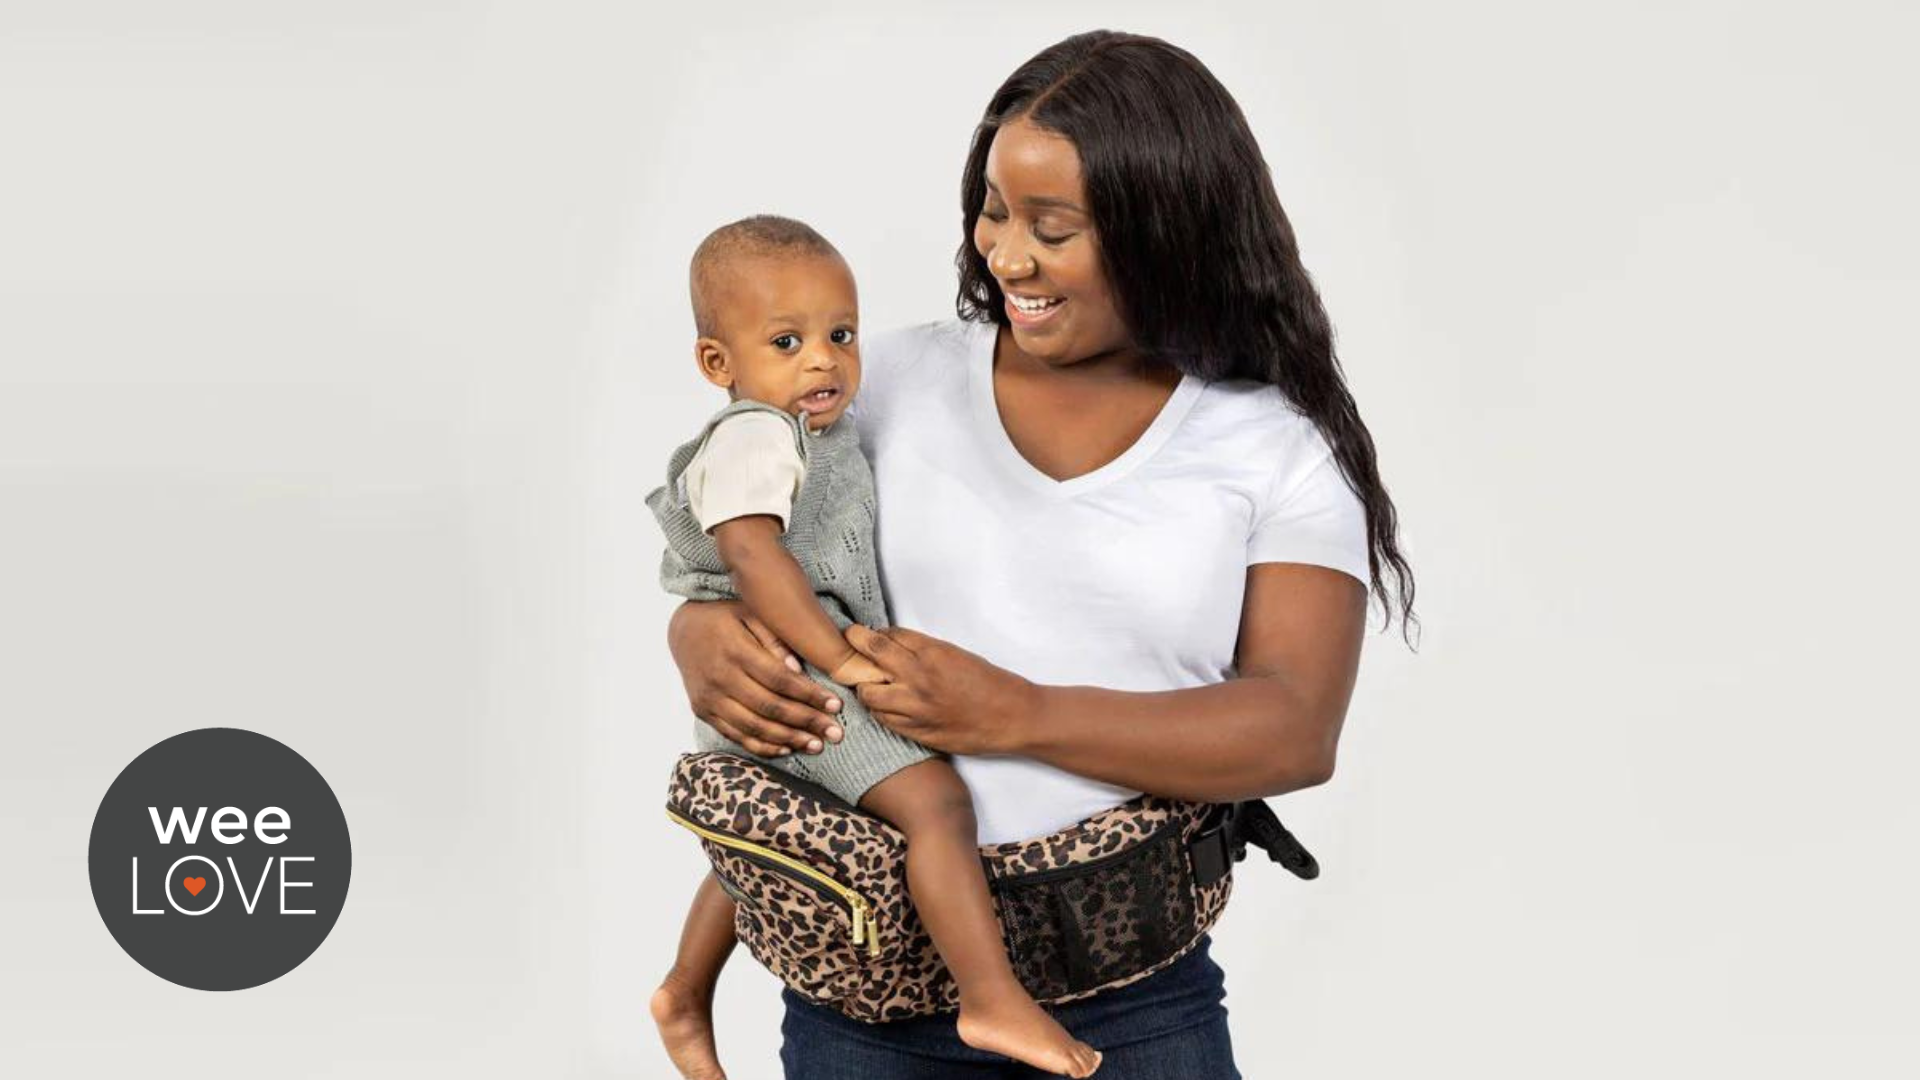 A Black mother in a white tshirt carries her Black, toddler-aged son a camo-printed Tushbaby, a hip carrier. She is smiling at her son, he is looking at the camera.